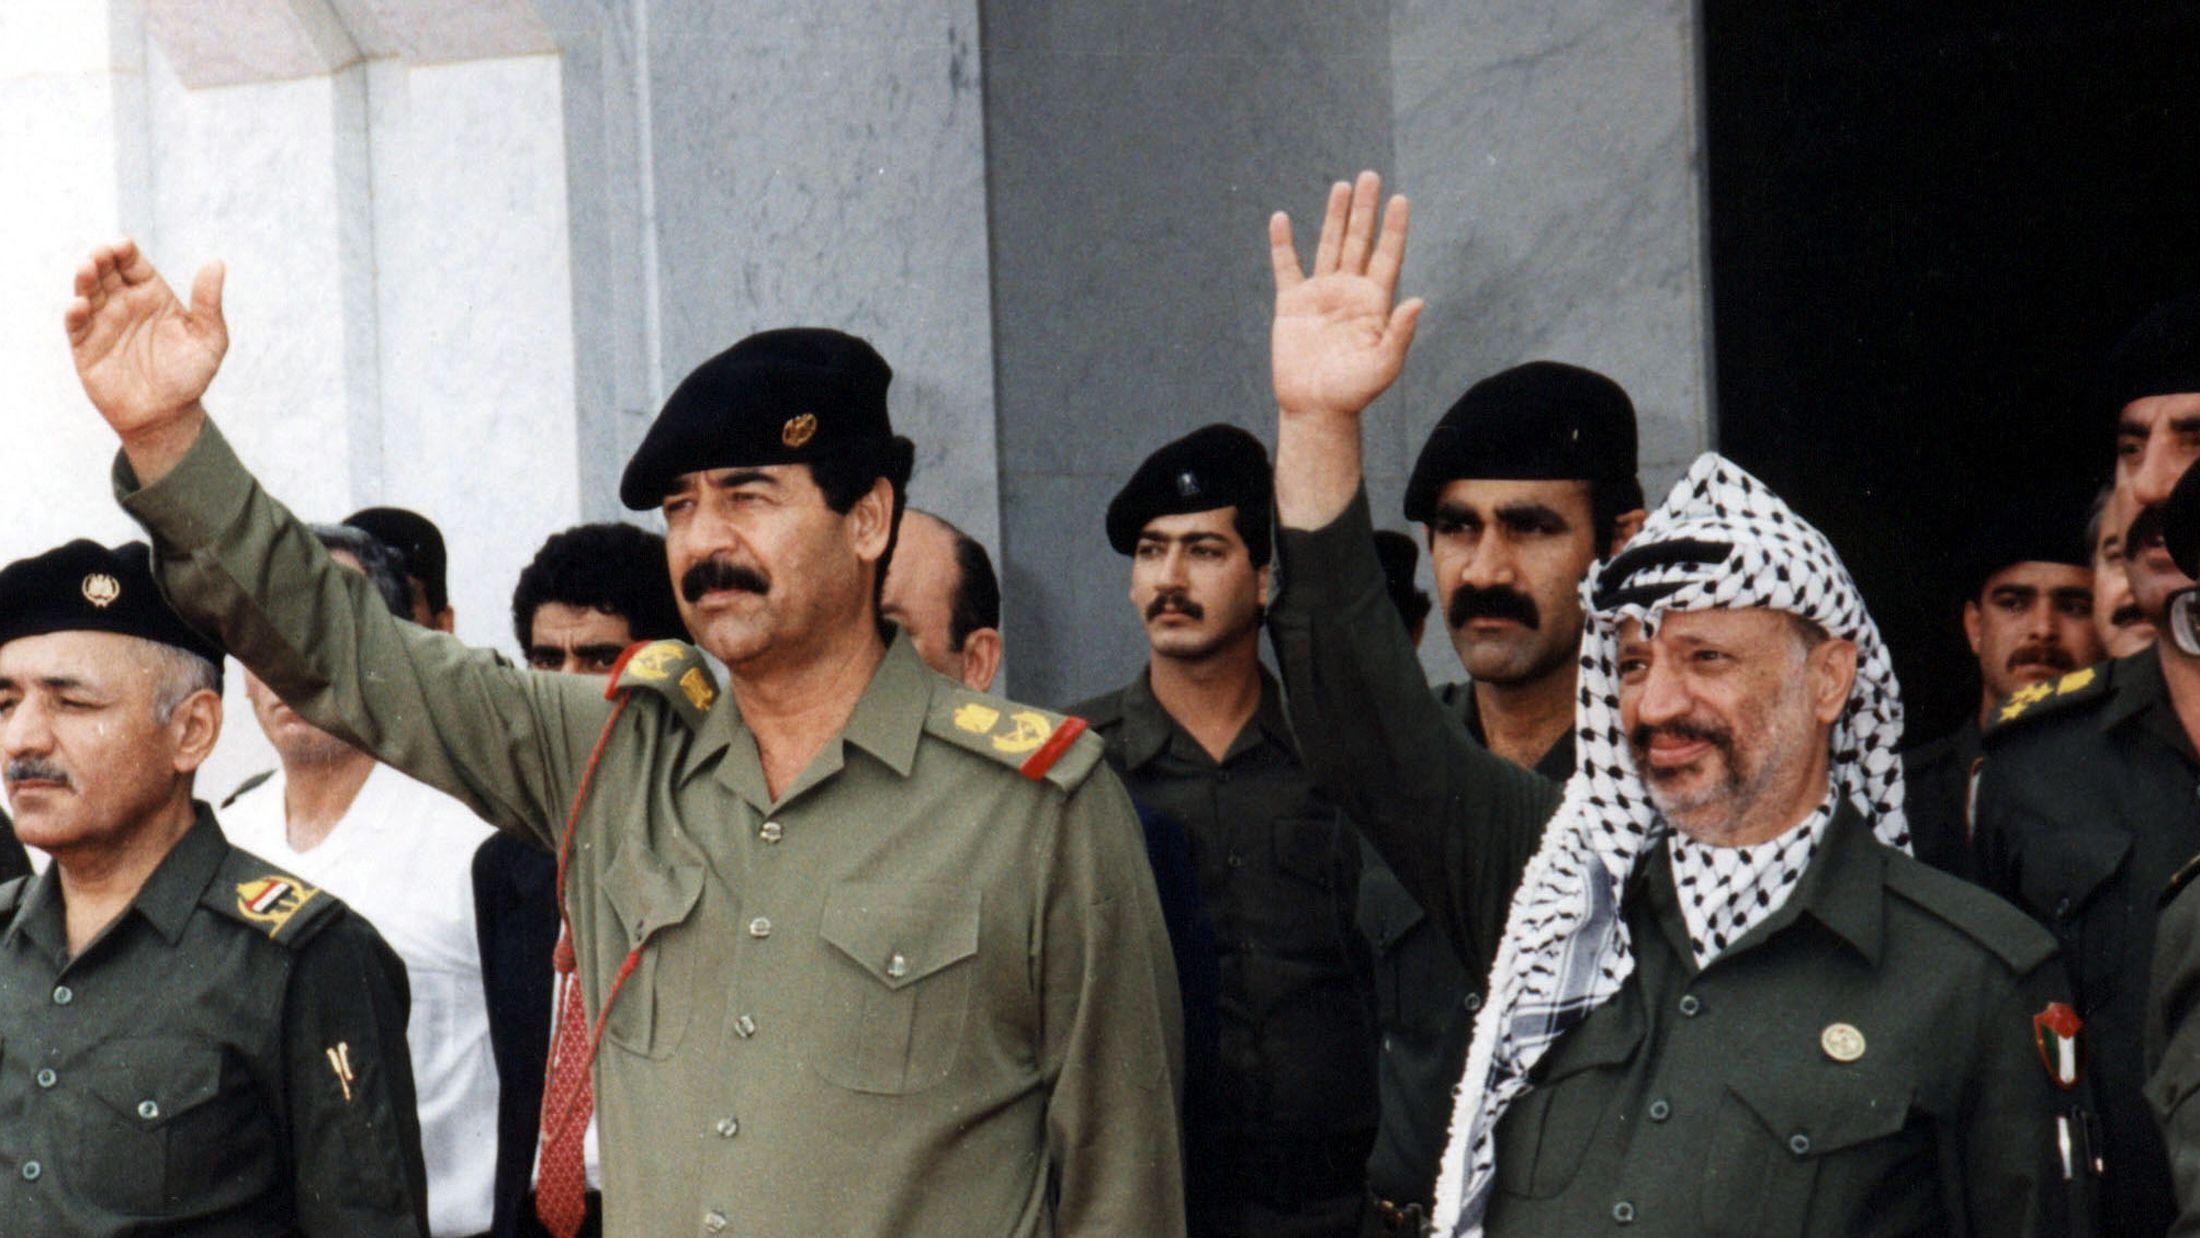 You can say this for Saddam Hussein: he meant what he said